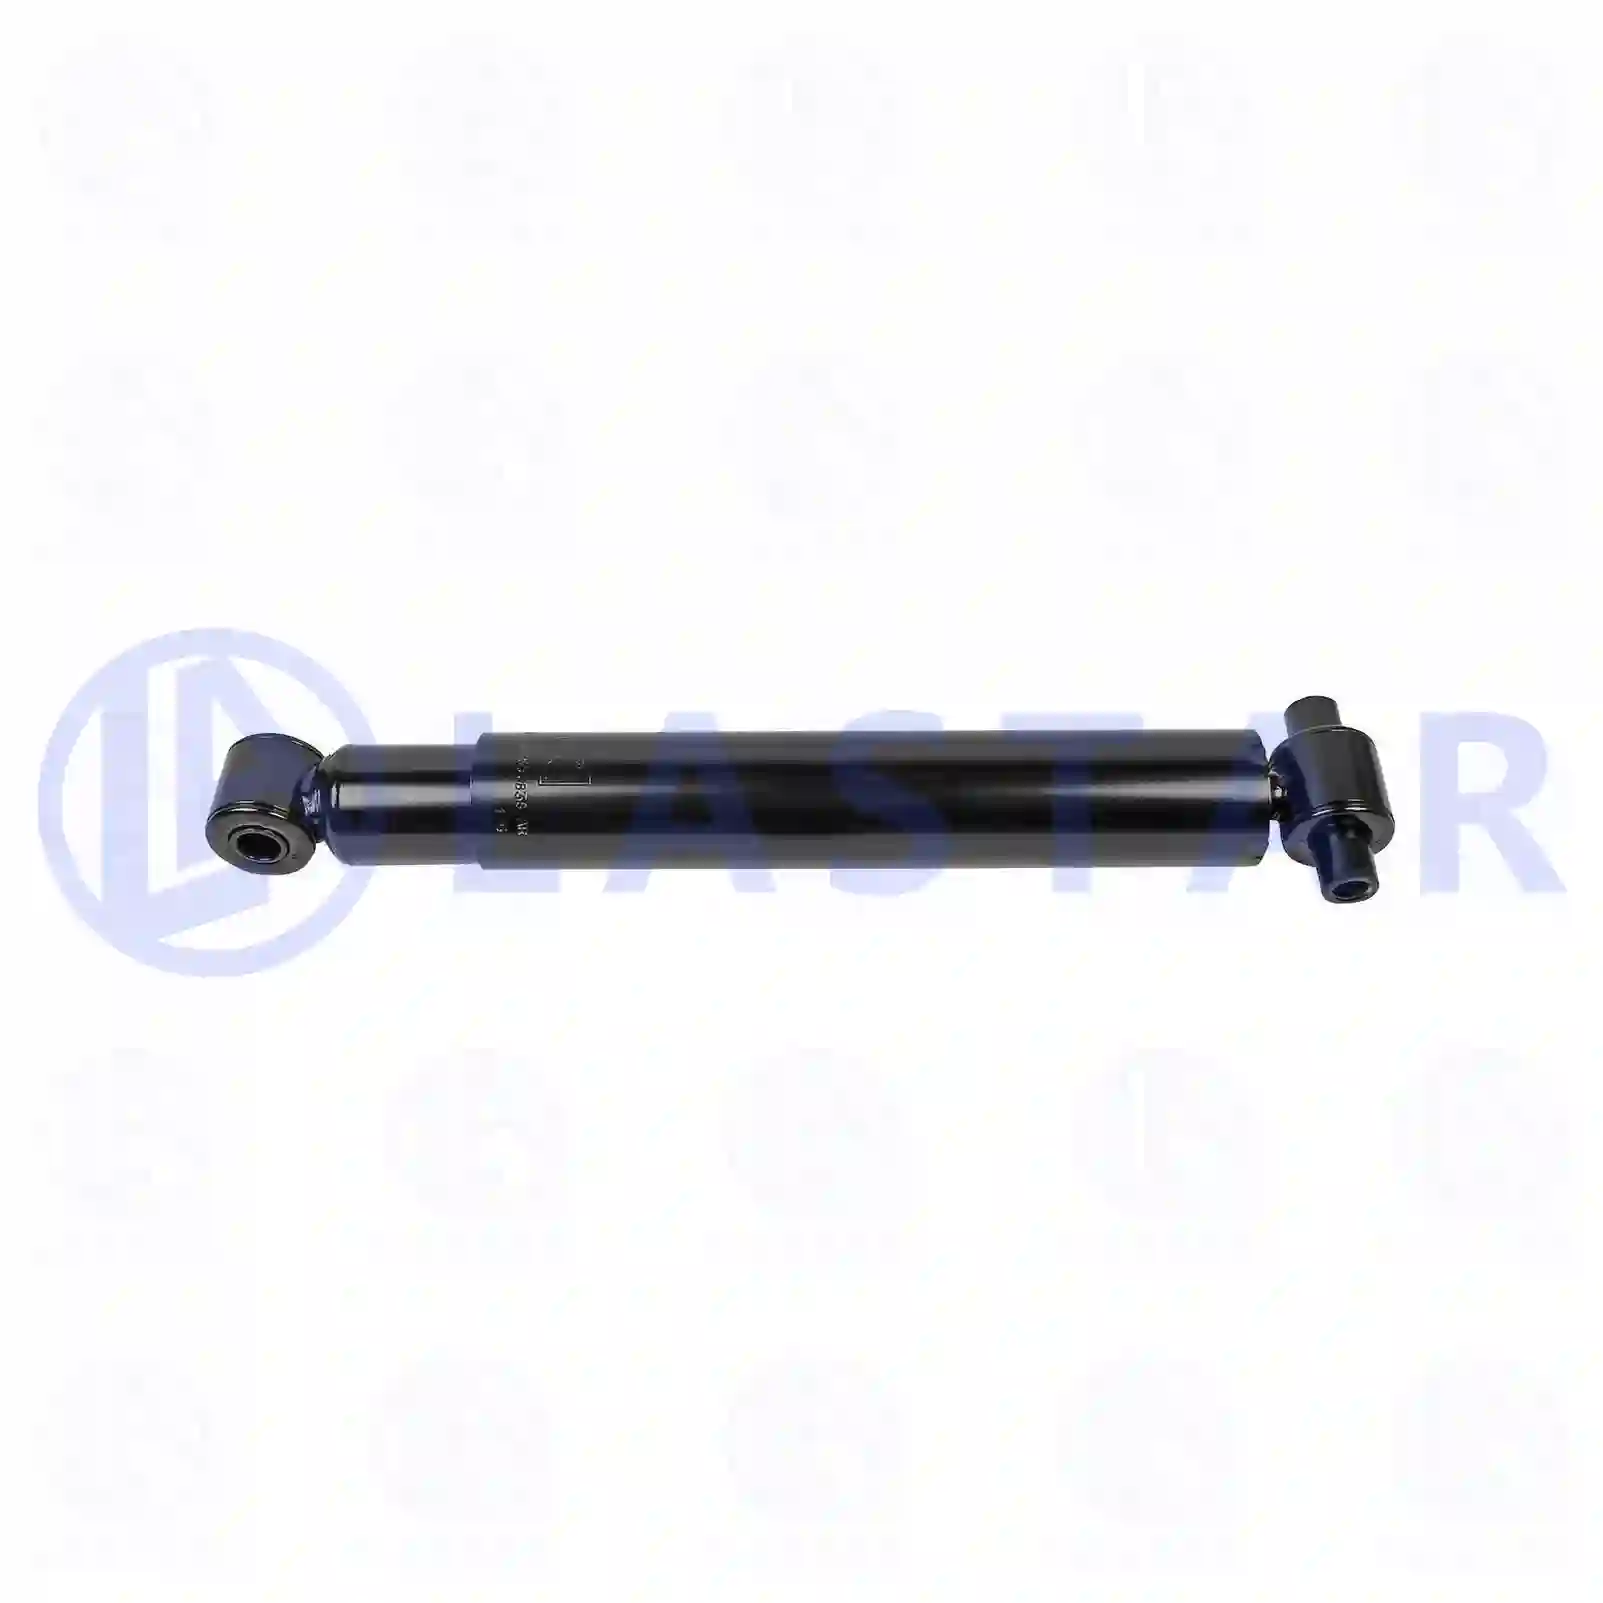 Shock absorber, 77729920, 1427423, 2031227, ZG41522-0008, , , , ||  77729920 Lastar Spare Part | Truck Spare Parts, Auotomotive Spare Parts Shock absorber, 77729920, 1427423, 2031227, ZG41522-0008, , , , ||  77729920 Lastar Spare Part | Truck Spare Parts, Auotomotive Spare Parts